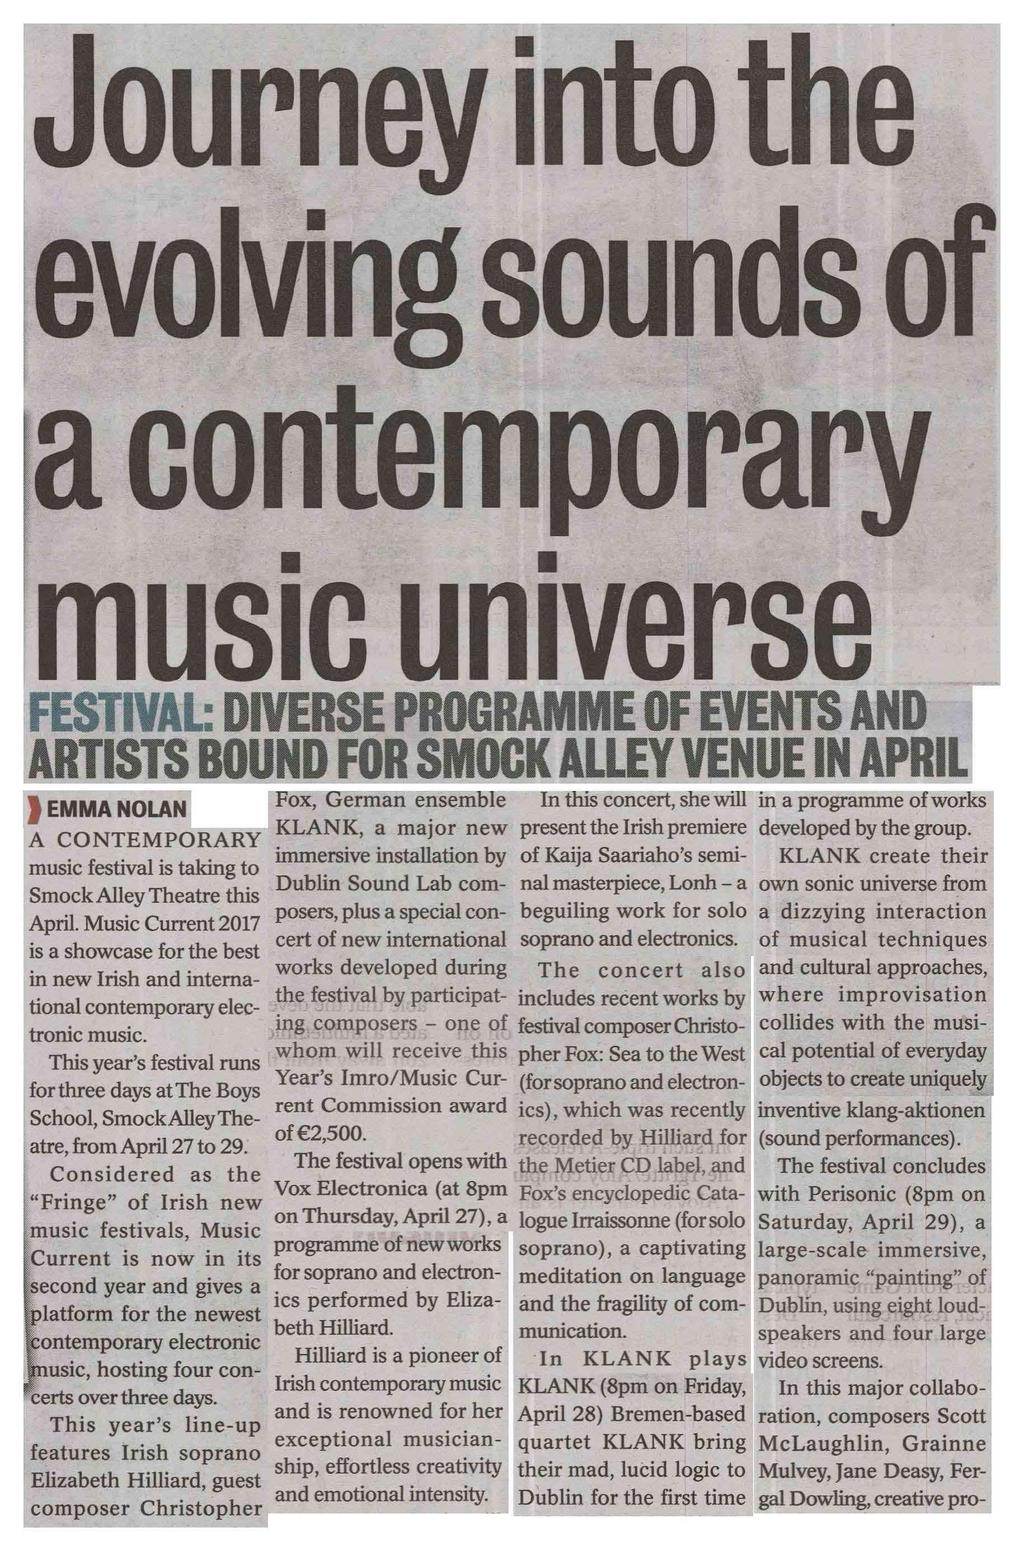 Dublin City Gazette* -12- Circulation: 19000 Area of Clip: 78100mm² Page 1 of 3 Journey into the evolving sounds of a contemporary music universe FESTIVAL: DIVERSE PROGRAMME OF EVENTS AND ARTISTS